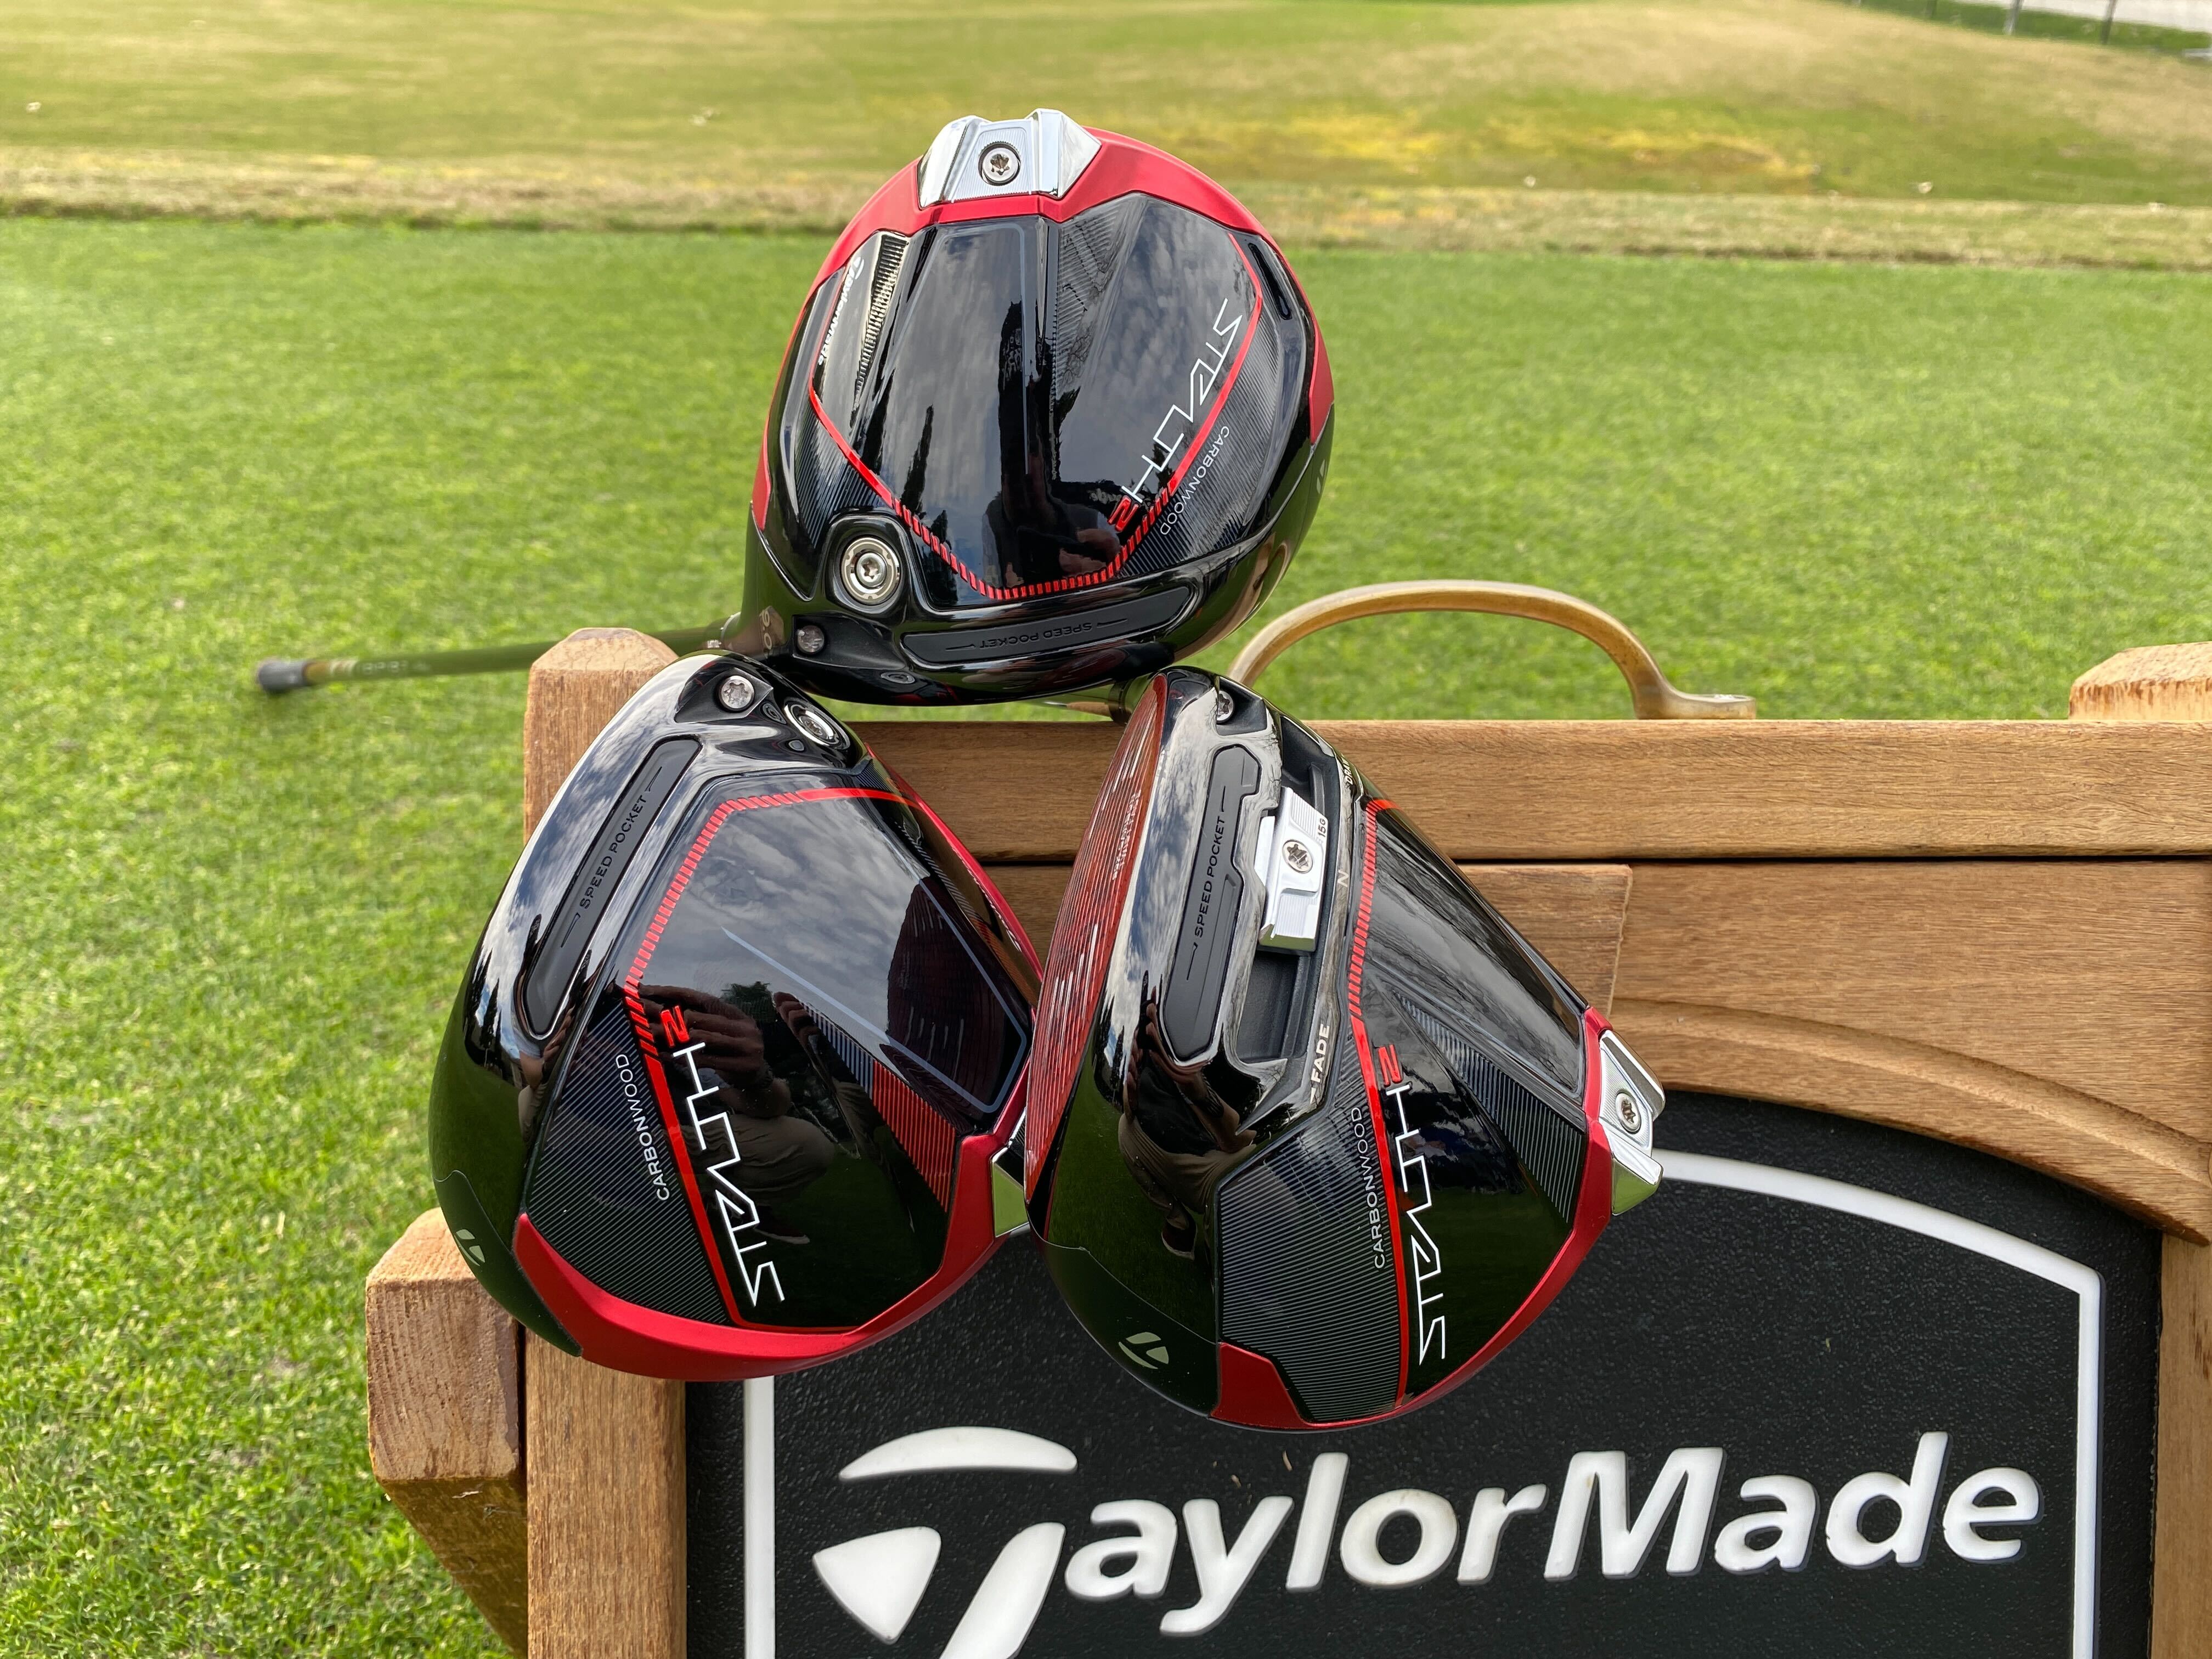 TaylorMade Stealth 2 drivers